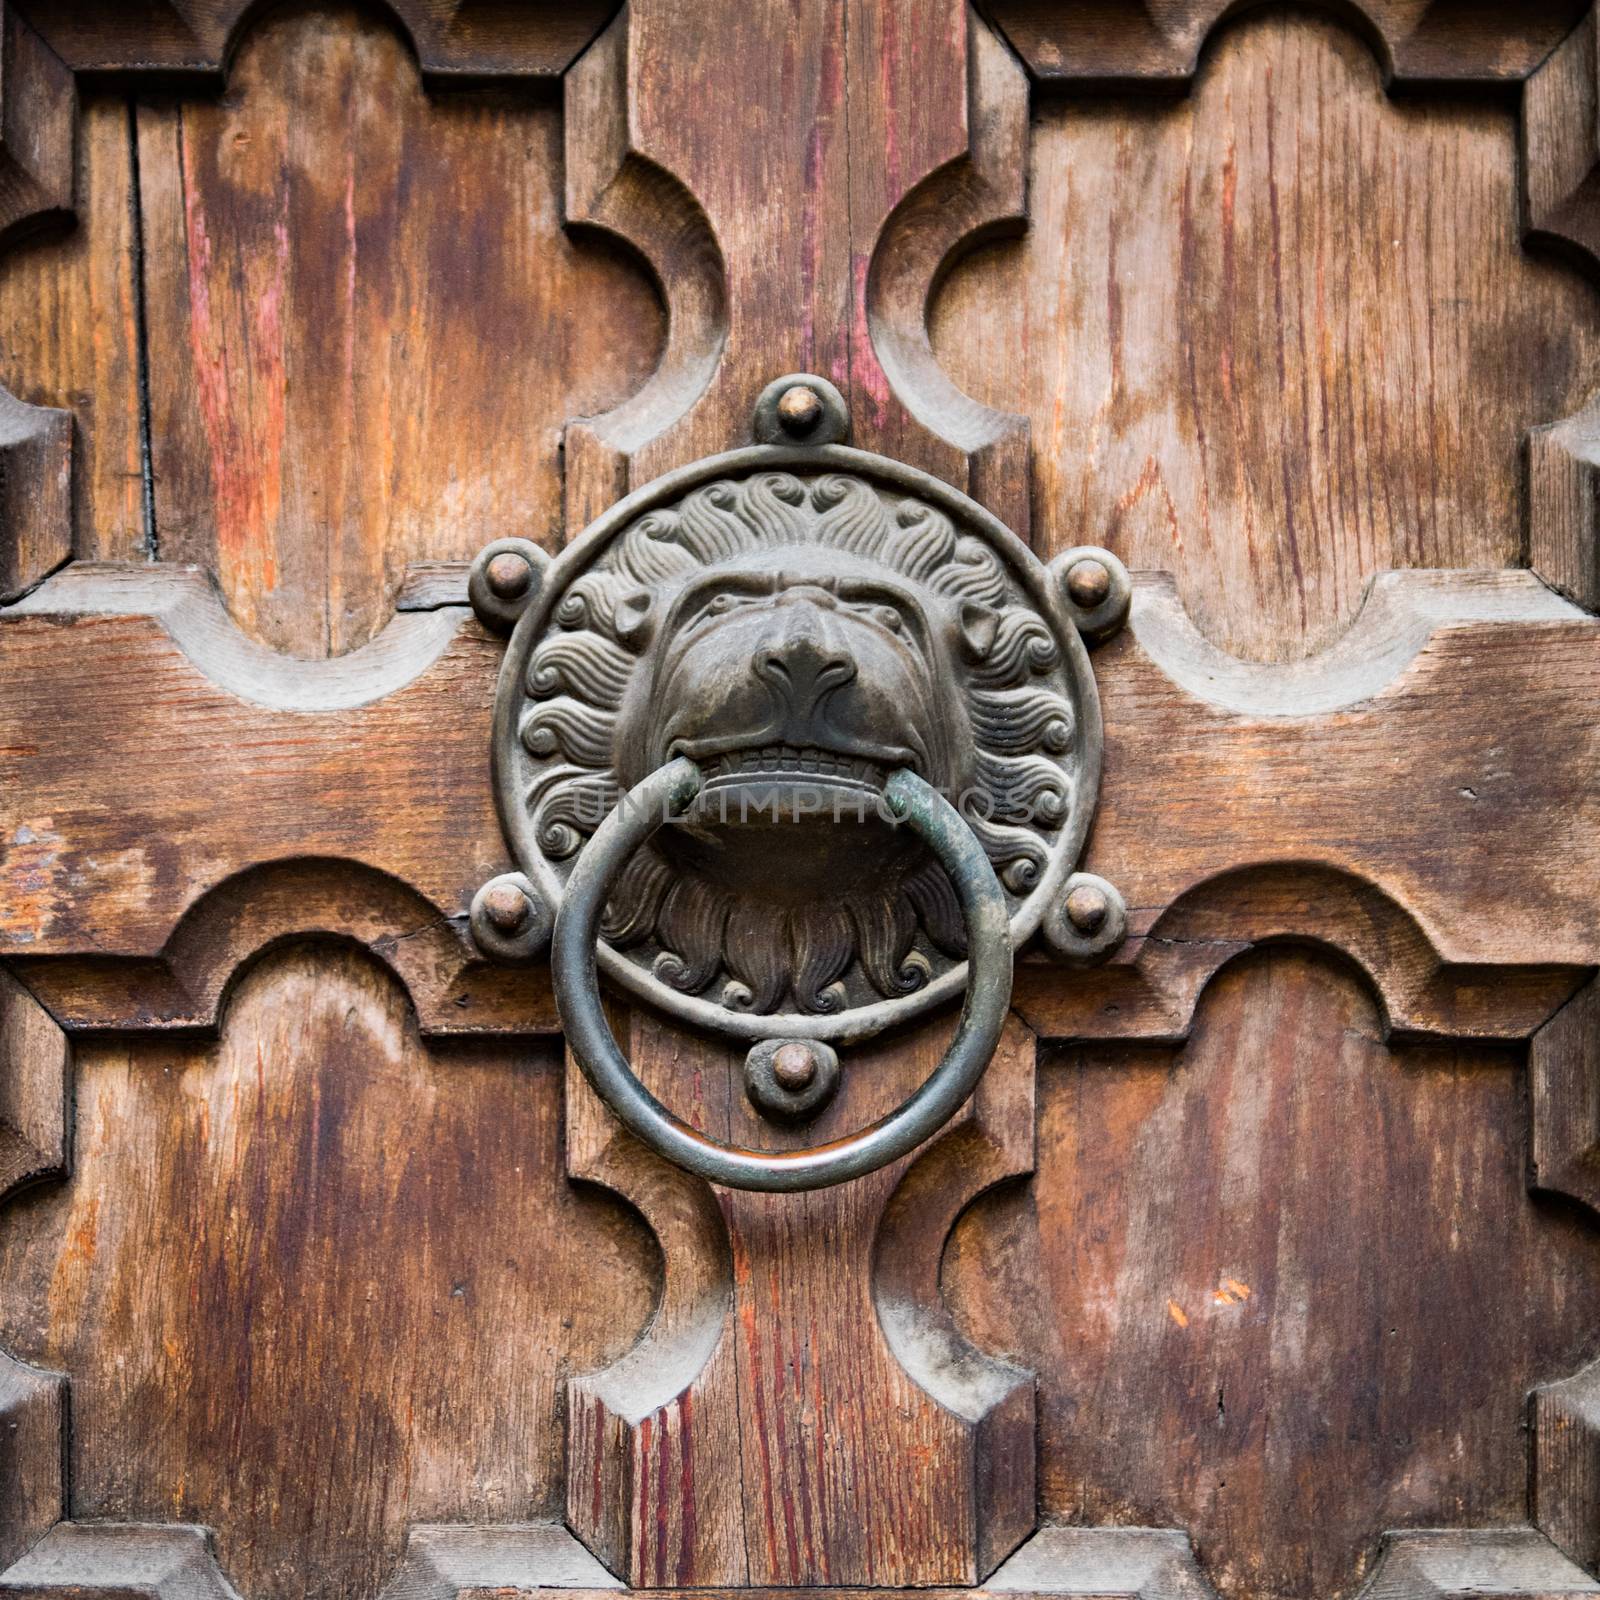 Antique door knocker shaped lion's head. by Isaac74